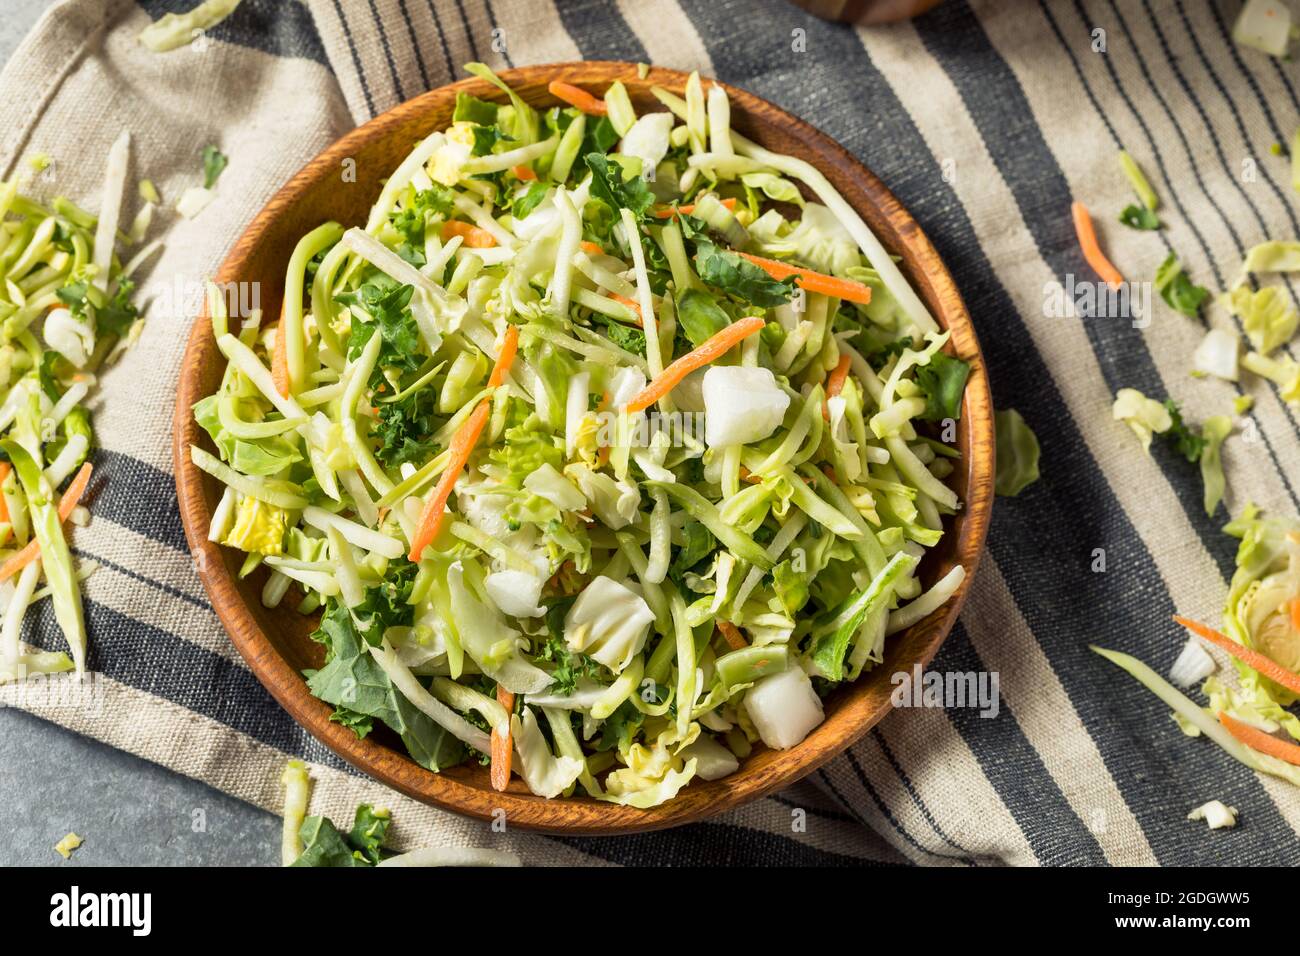 Healthy Homemade Shredded Cabbage Vegetable Power Blend in a Bowl Stock Photo